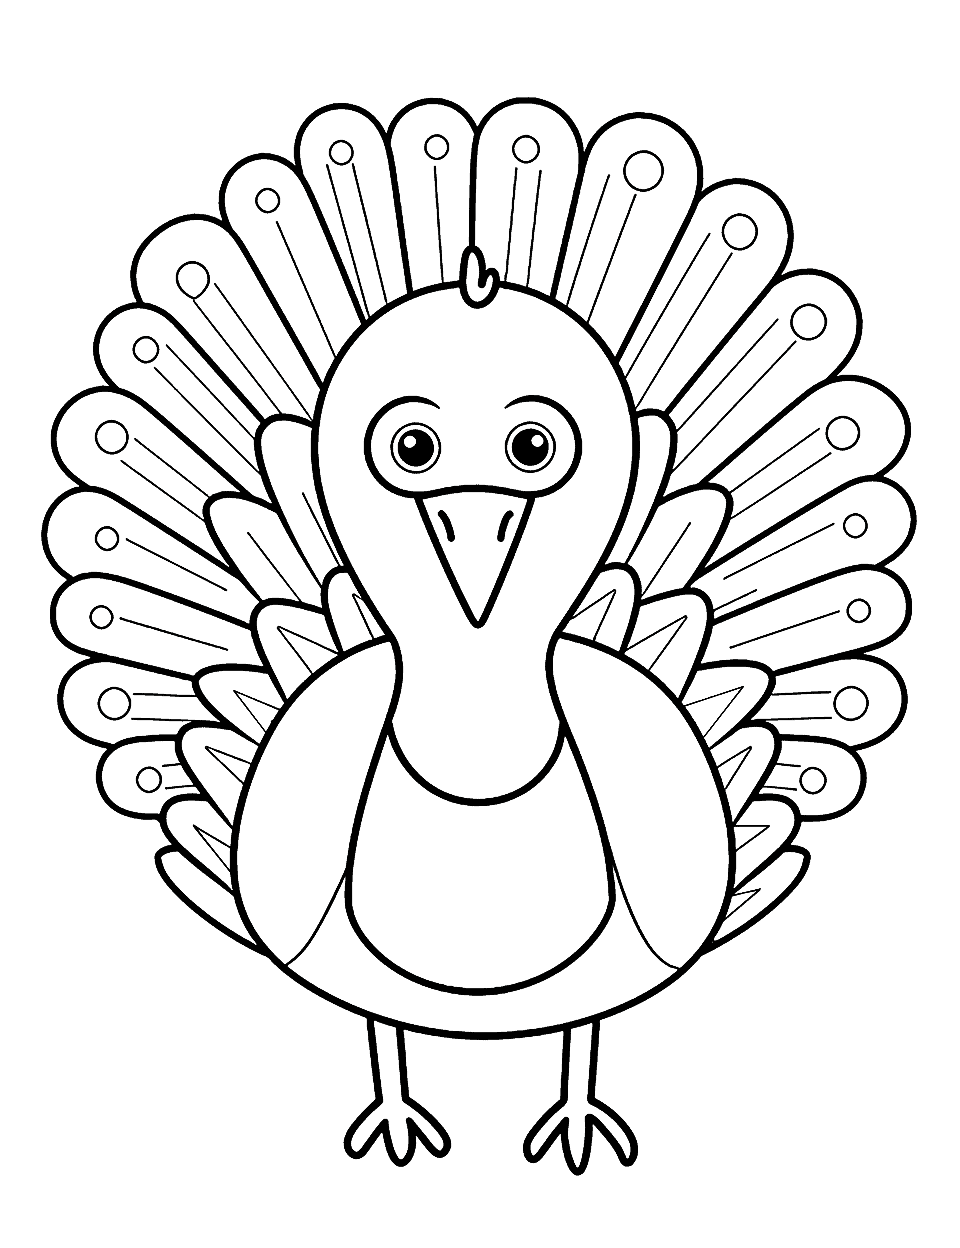 Easy Shape-Based Turkey Thanksgiving Coloring Page - A turkey designed with basic shapes, ideal for younger children to identify shapes and colors.